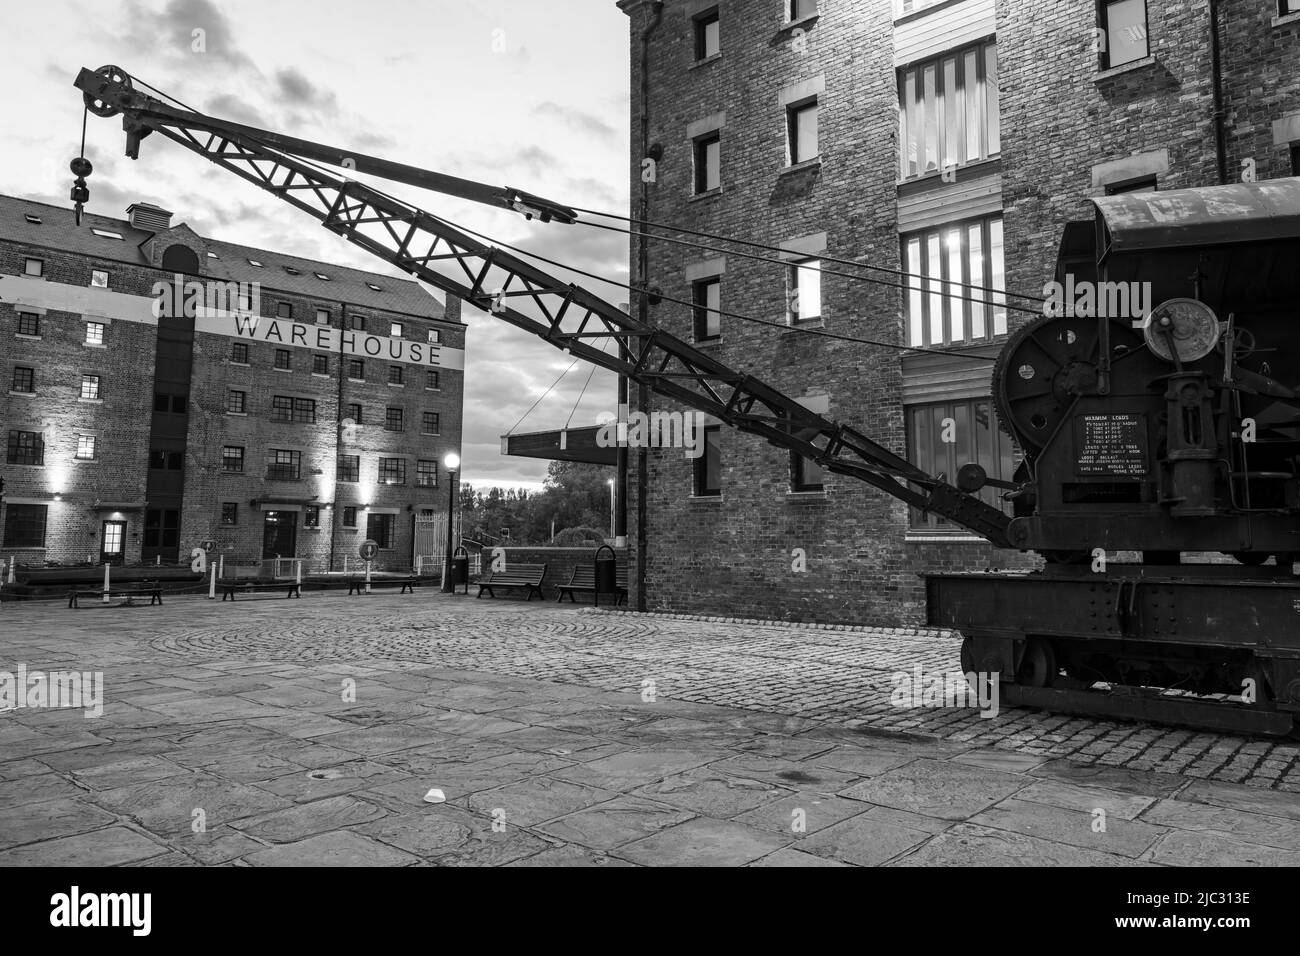 View of the old crane on the North quay Gloucester docks at dusk Stock Photo